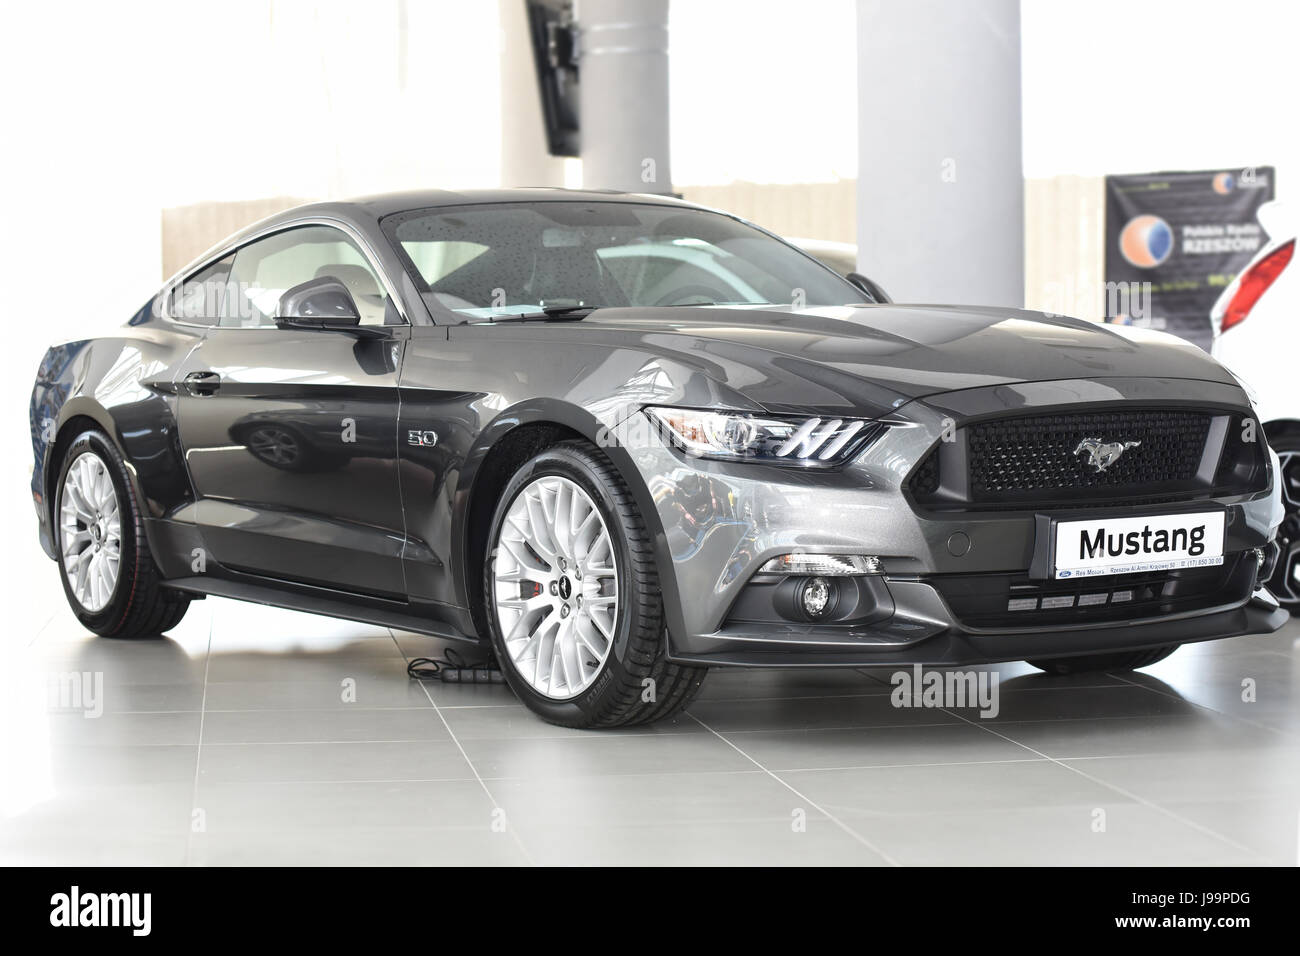 Rzeszow Poland May 28 17 Presentation Of The New Ford Mustang Fastback Gt V8 5 0 By Res Motors During Automative Exhibition In Rzeszow Stock Photo Alamy